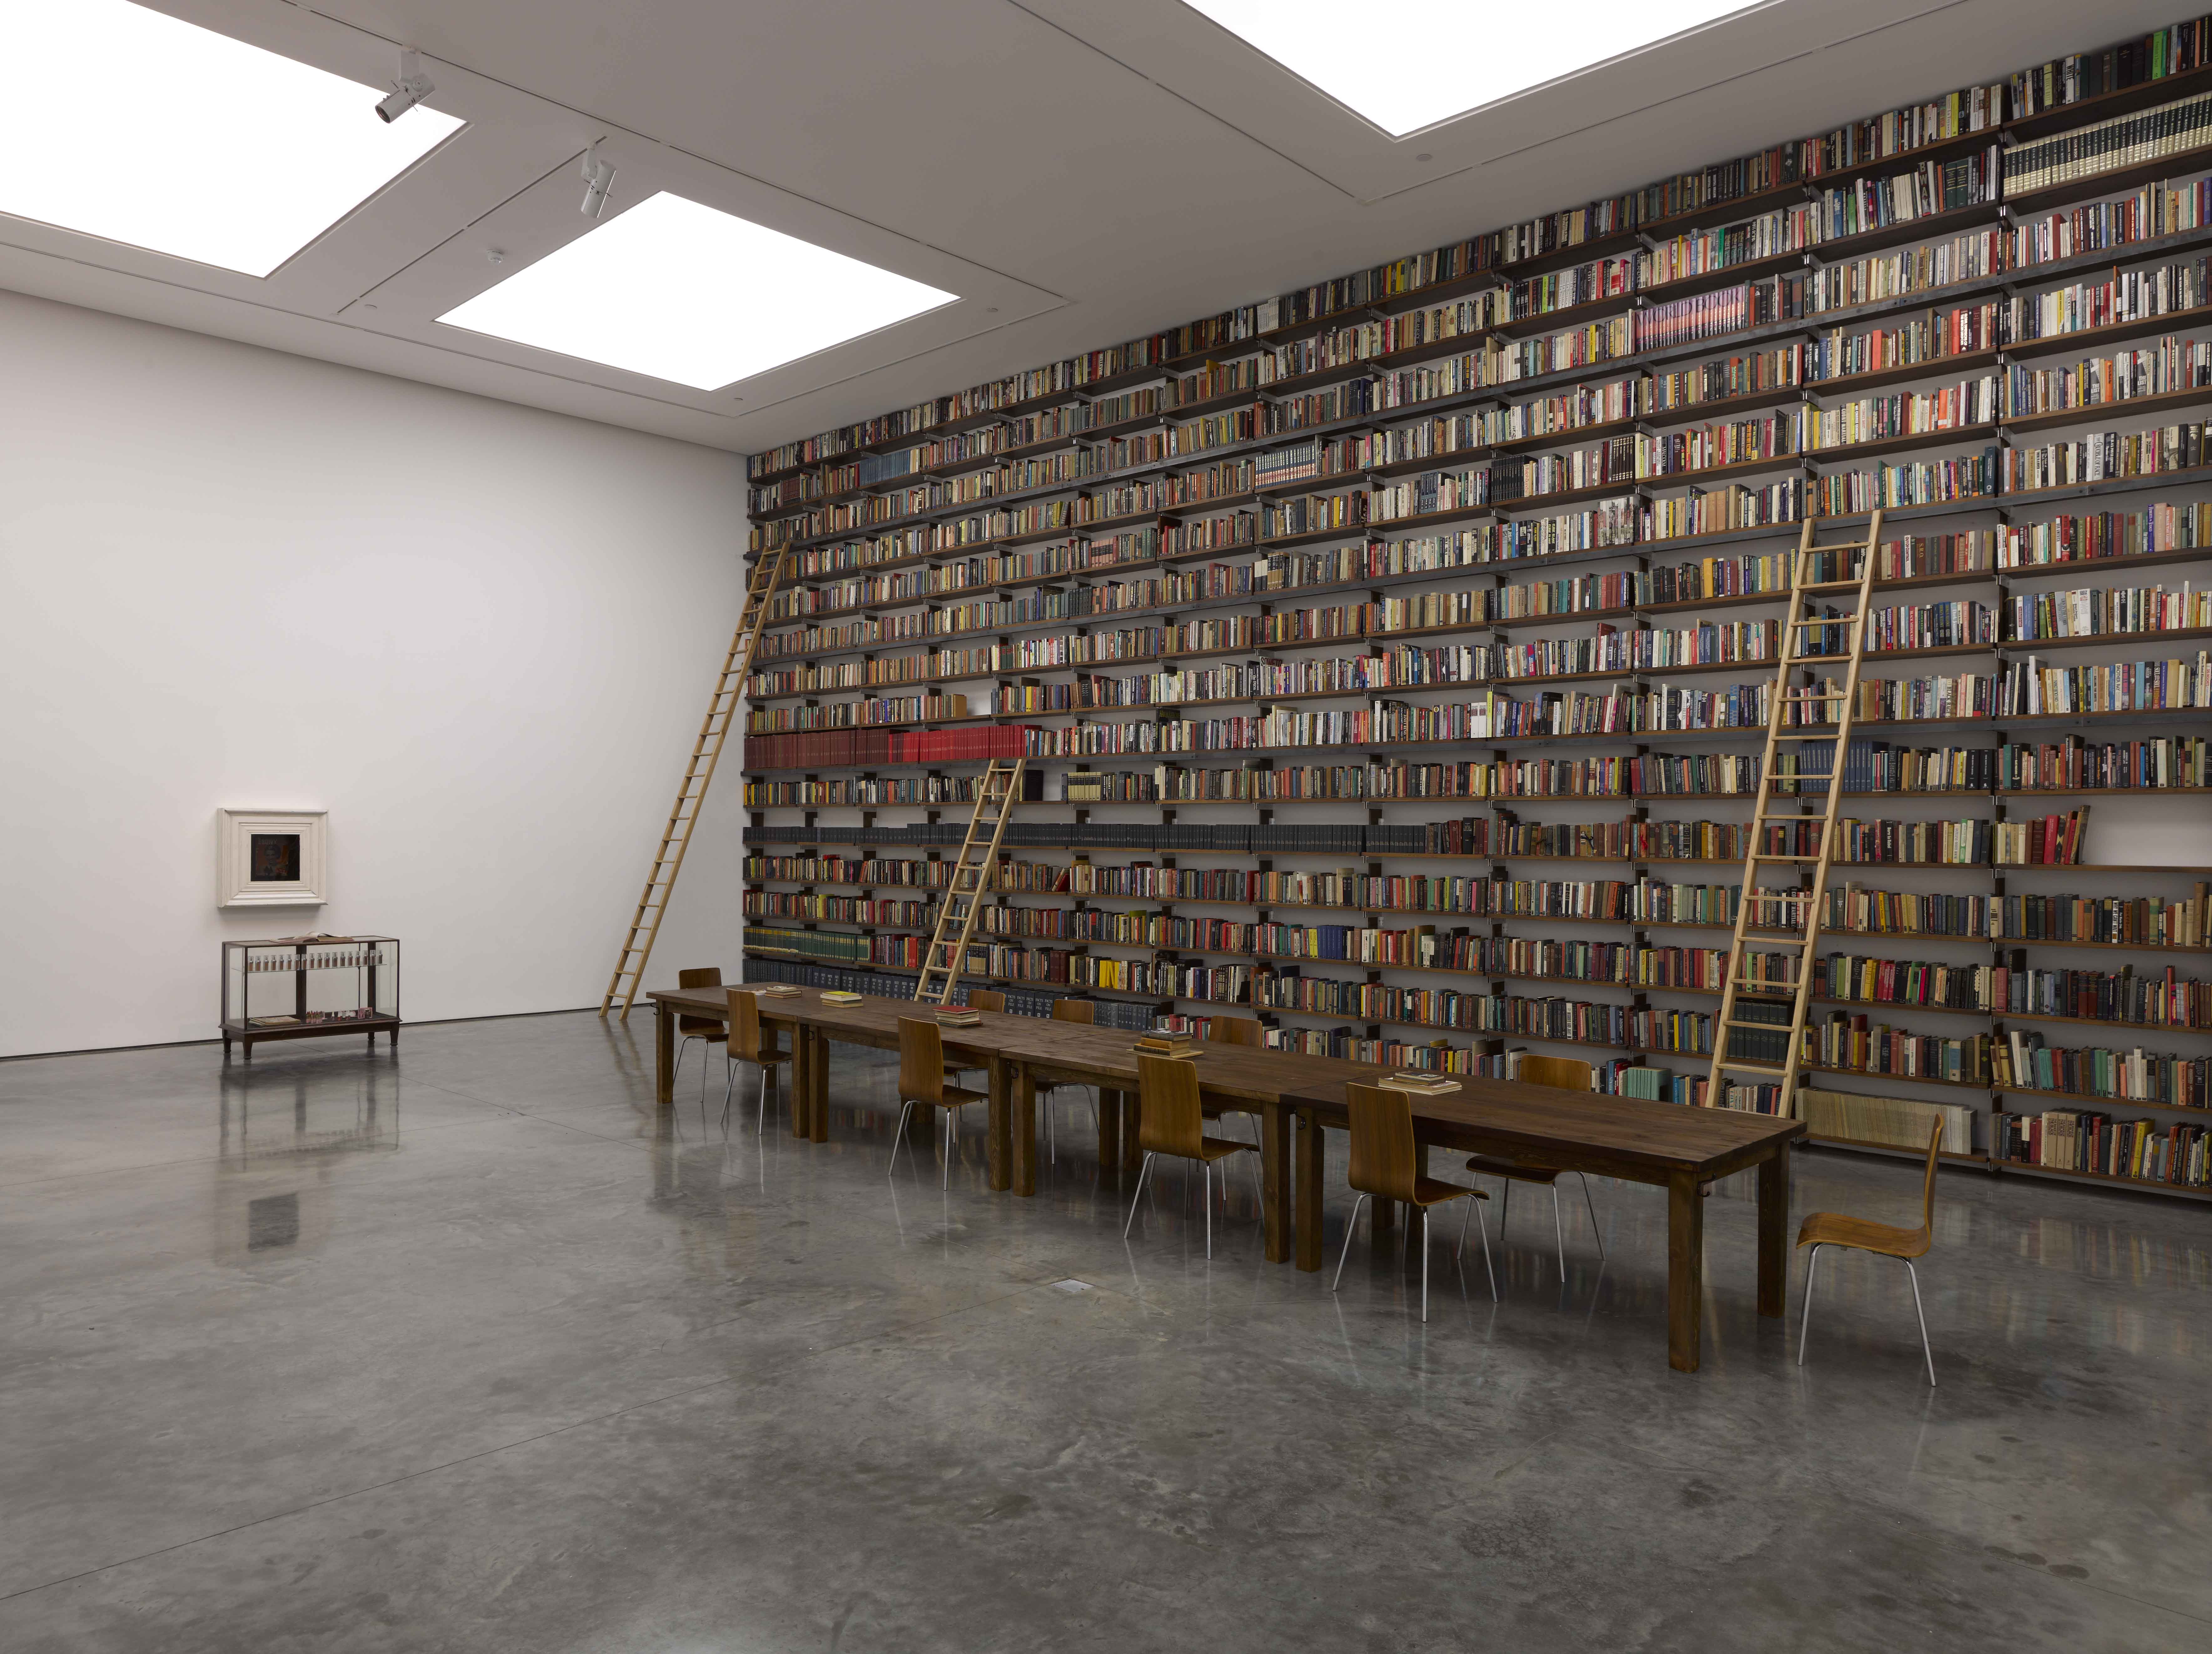 A portion of the Johnson Editorial Library, as displayed in Gates' 2011 White Cube exhibition, Labour is my Protest